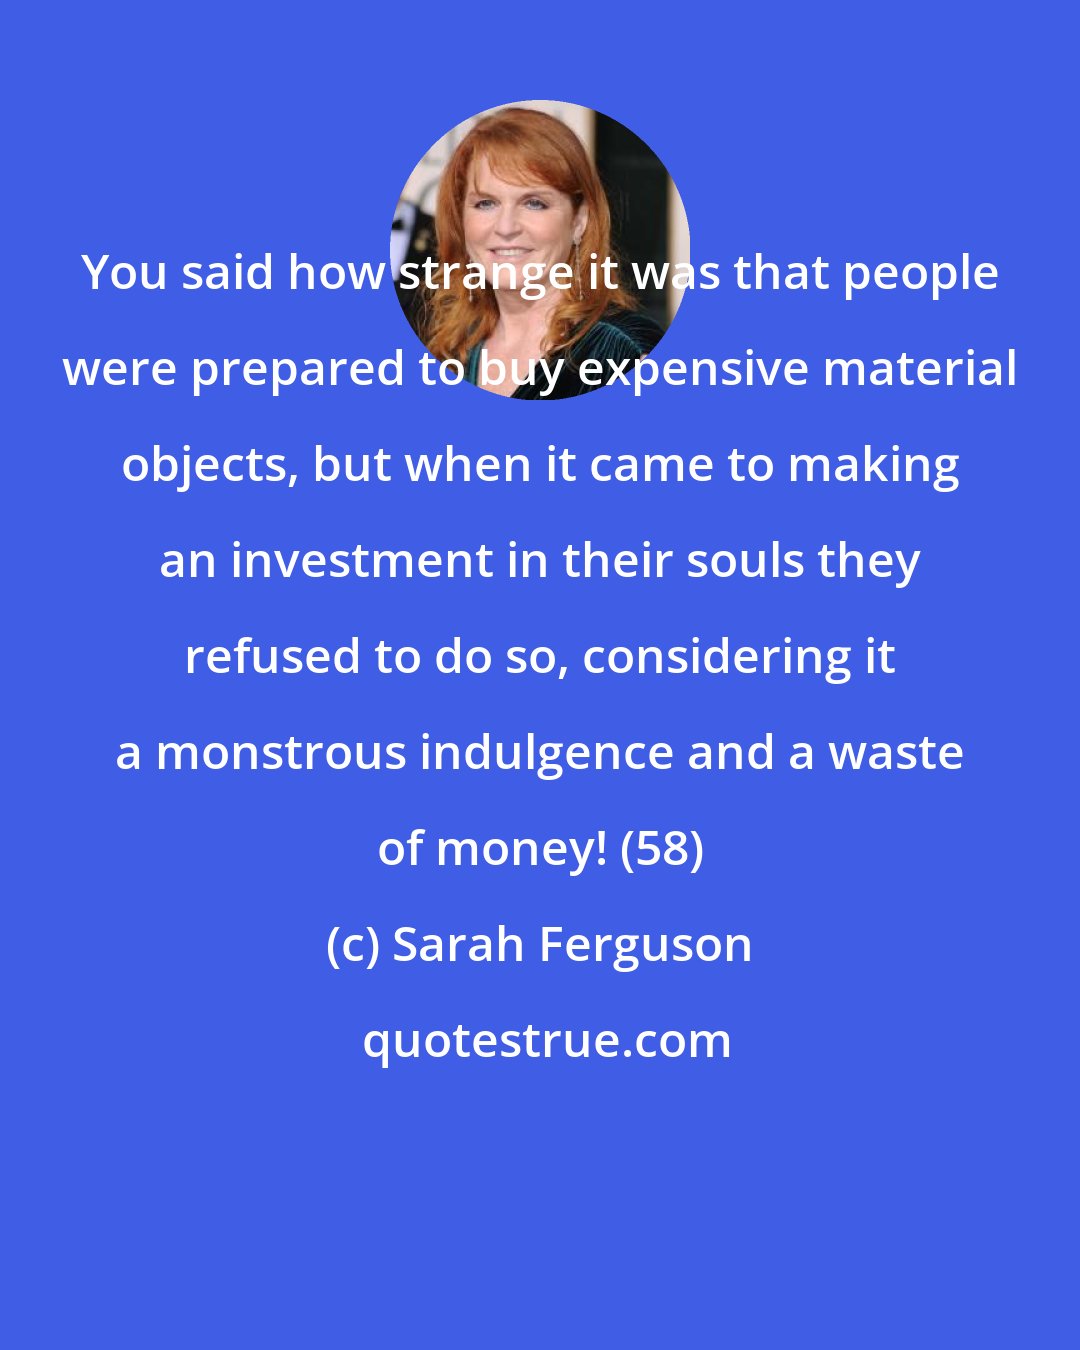 Sarah Ferguson: You said how strange it was that people were prepared to buy expensive material objects, but when it came to making an investment in their souls they refused to do so, considering it a monstrous indulgence and a waste of money! (58)